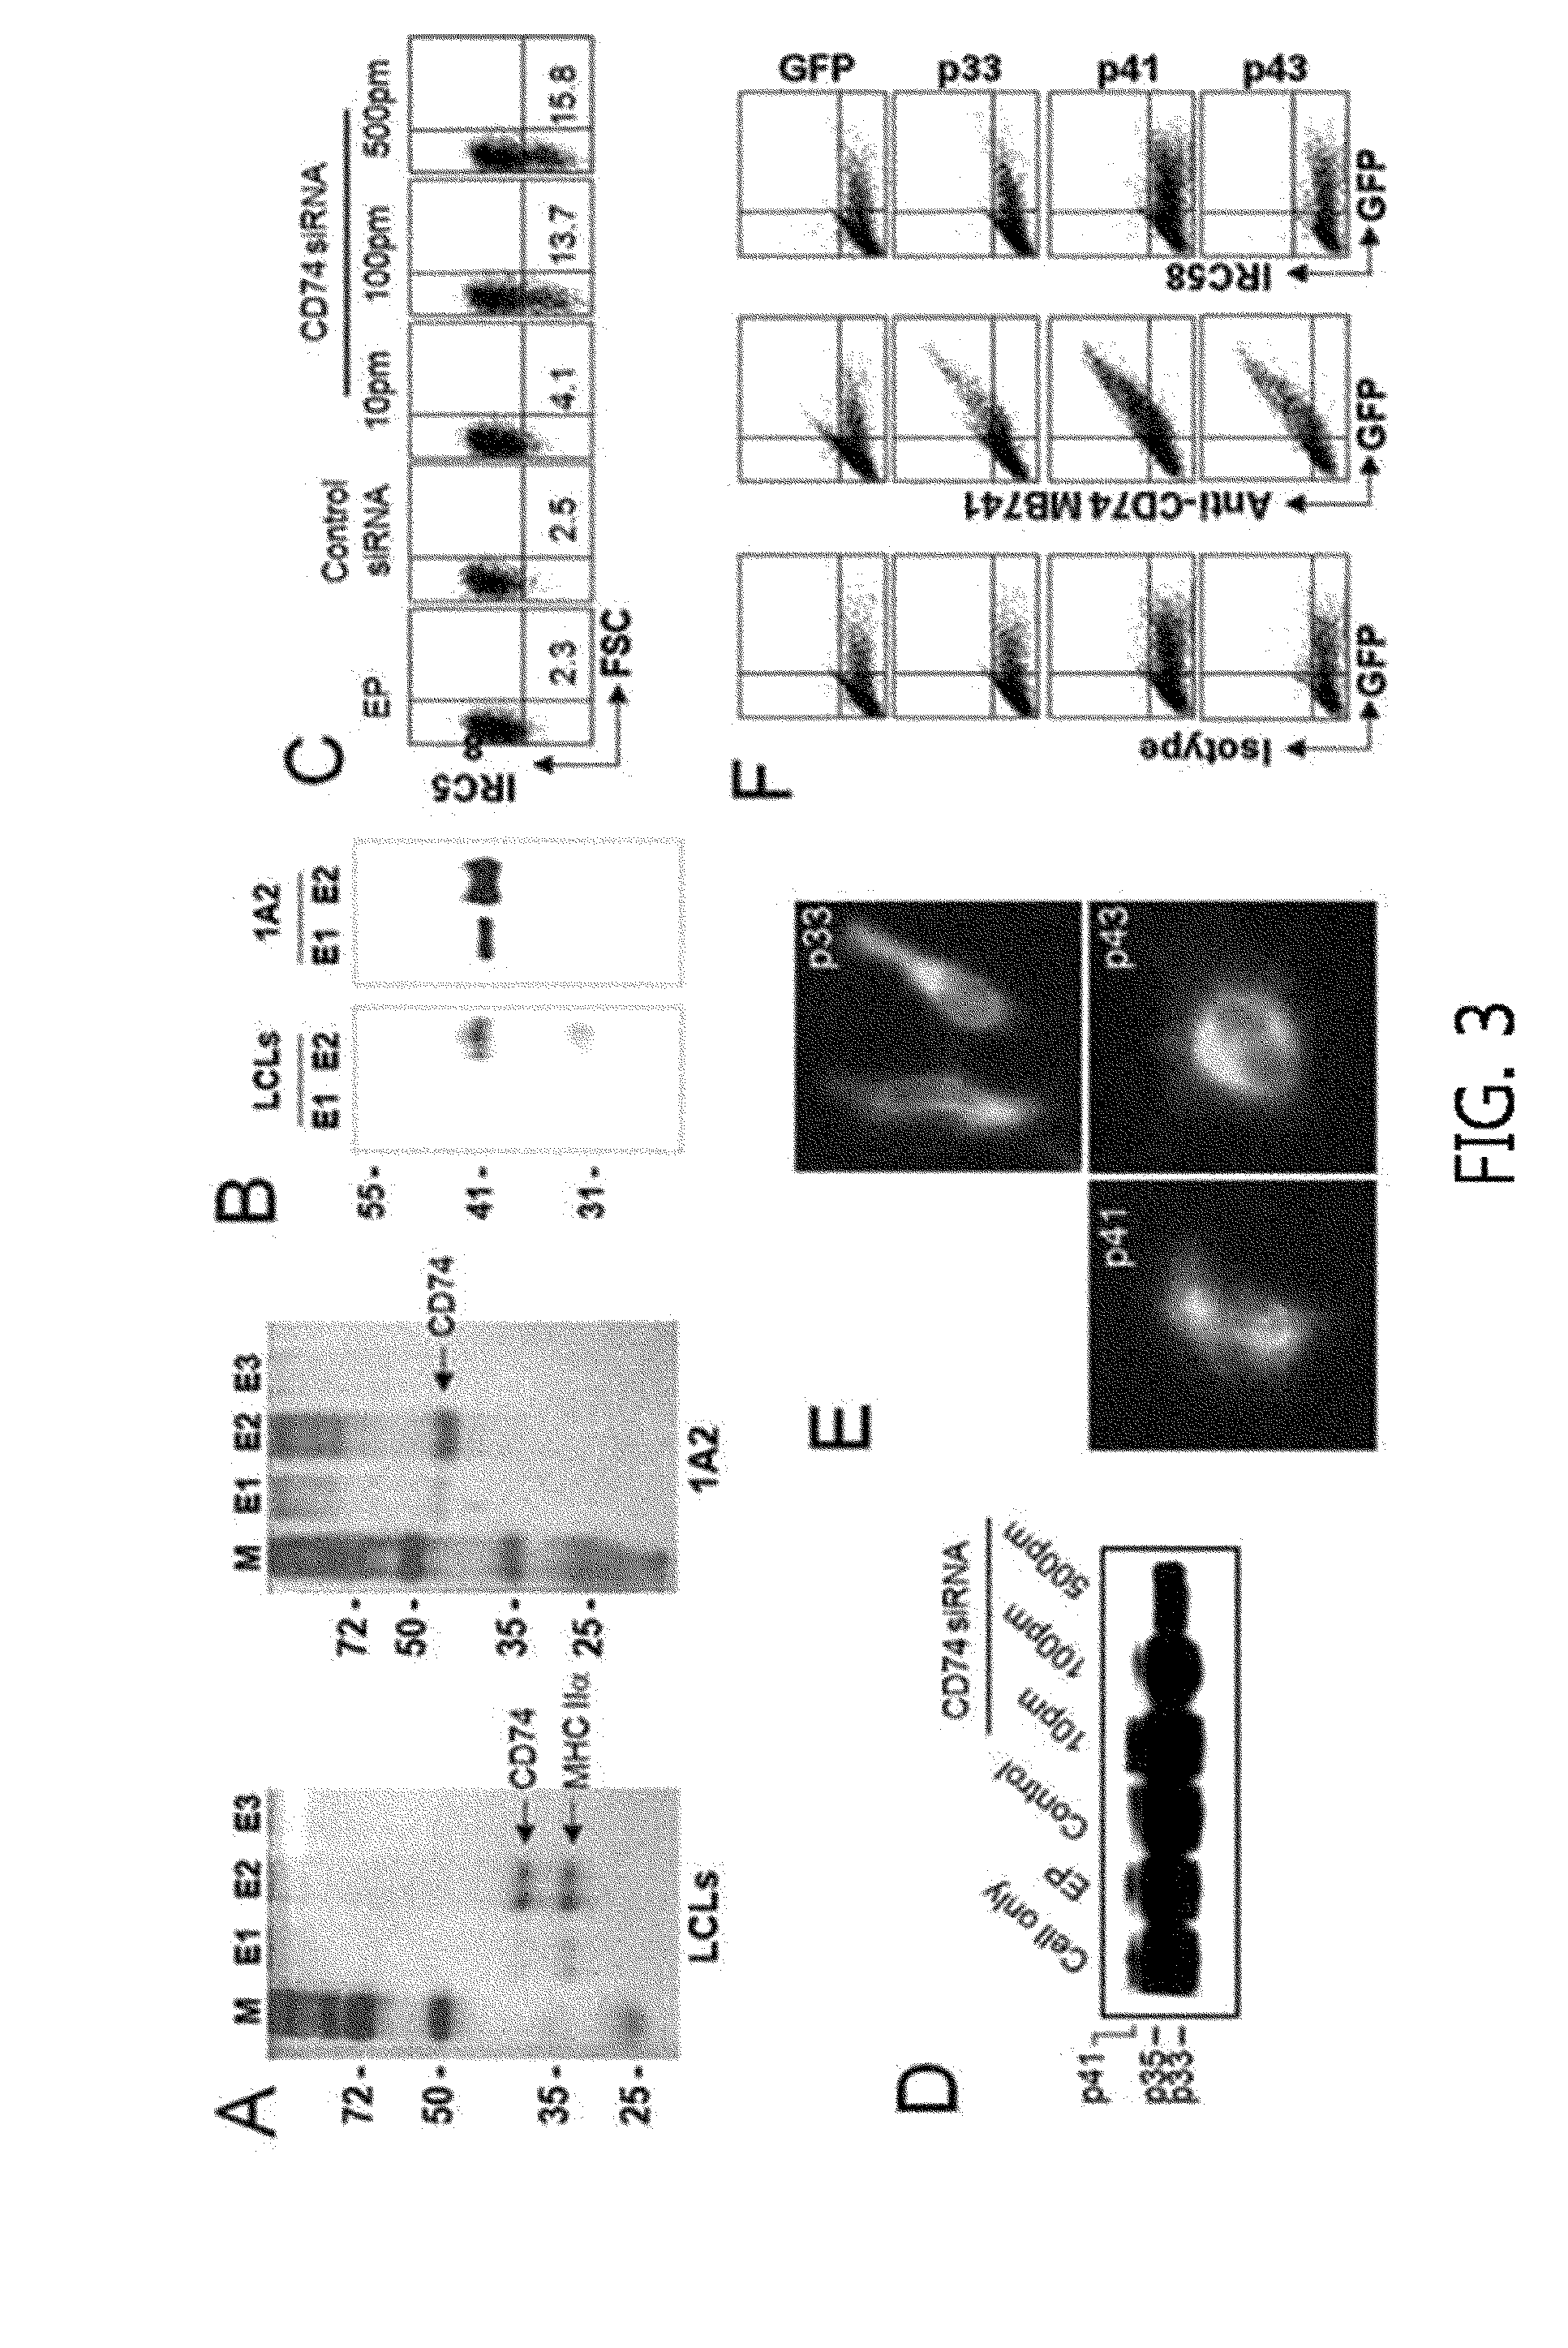 Monoclonal Antibody Which Specifically Recognizes B Cell Lymphoma and Use Thereof